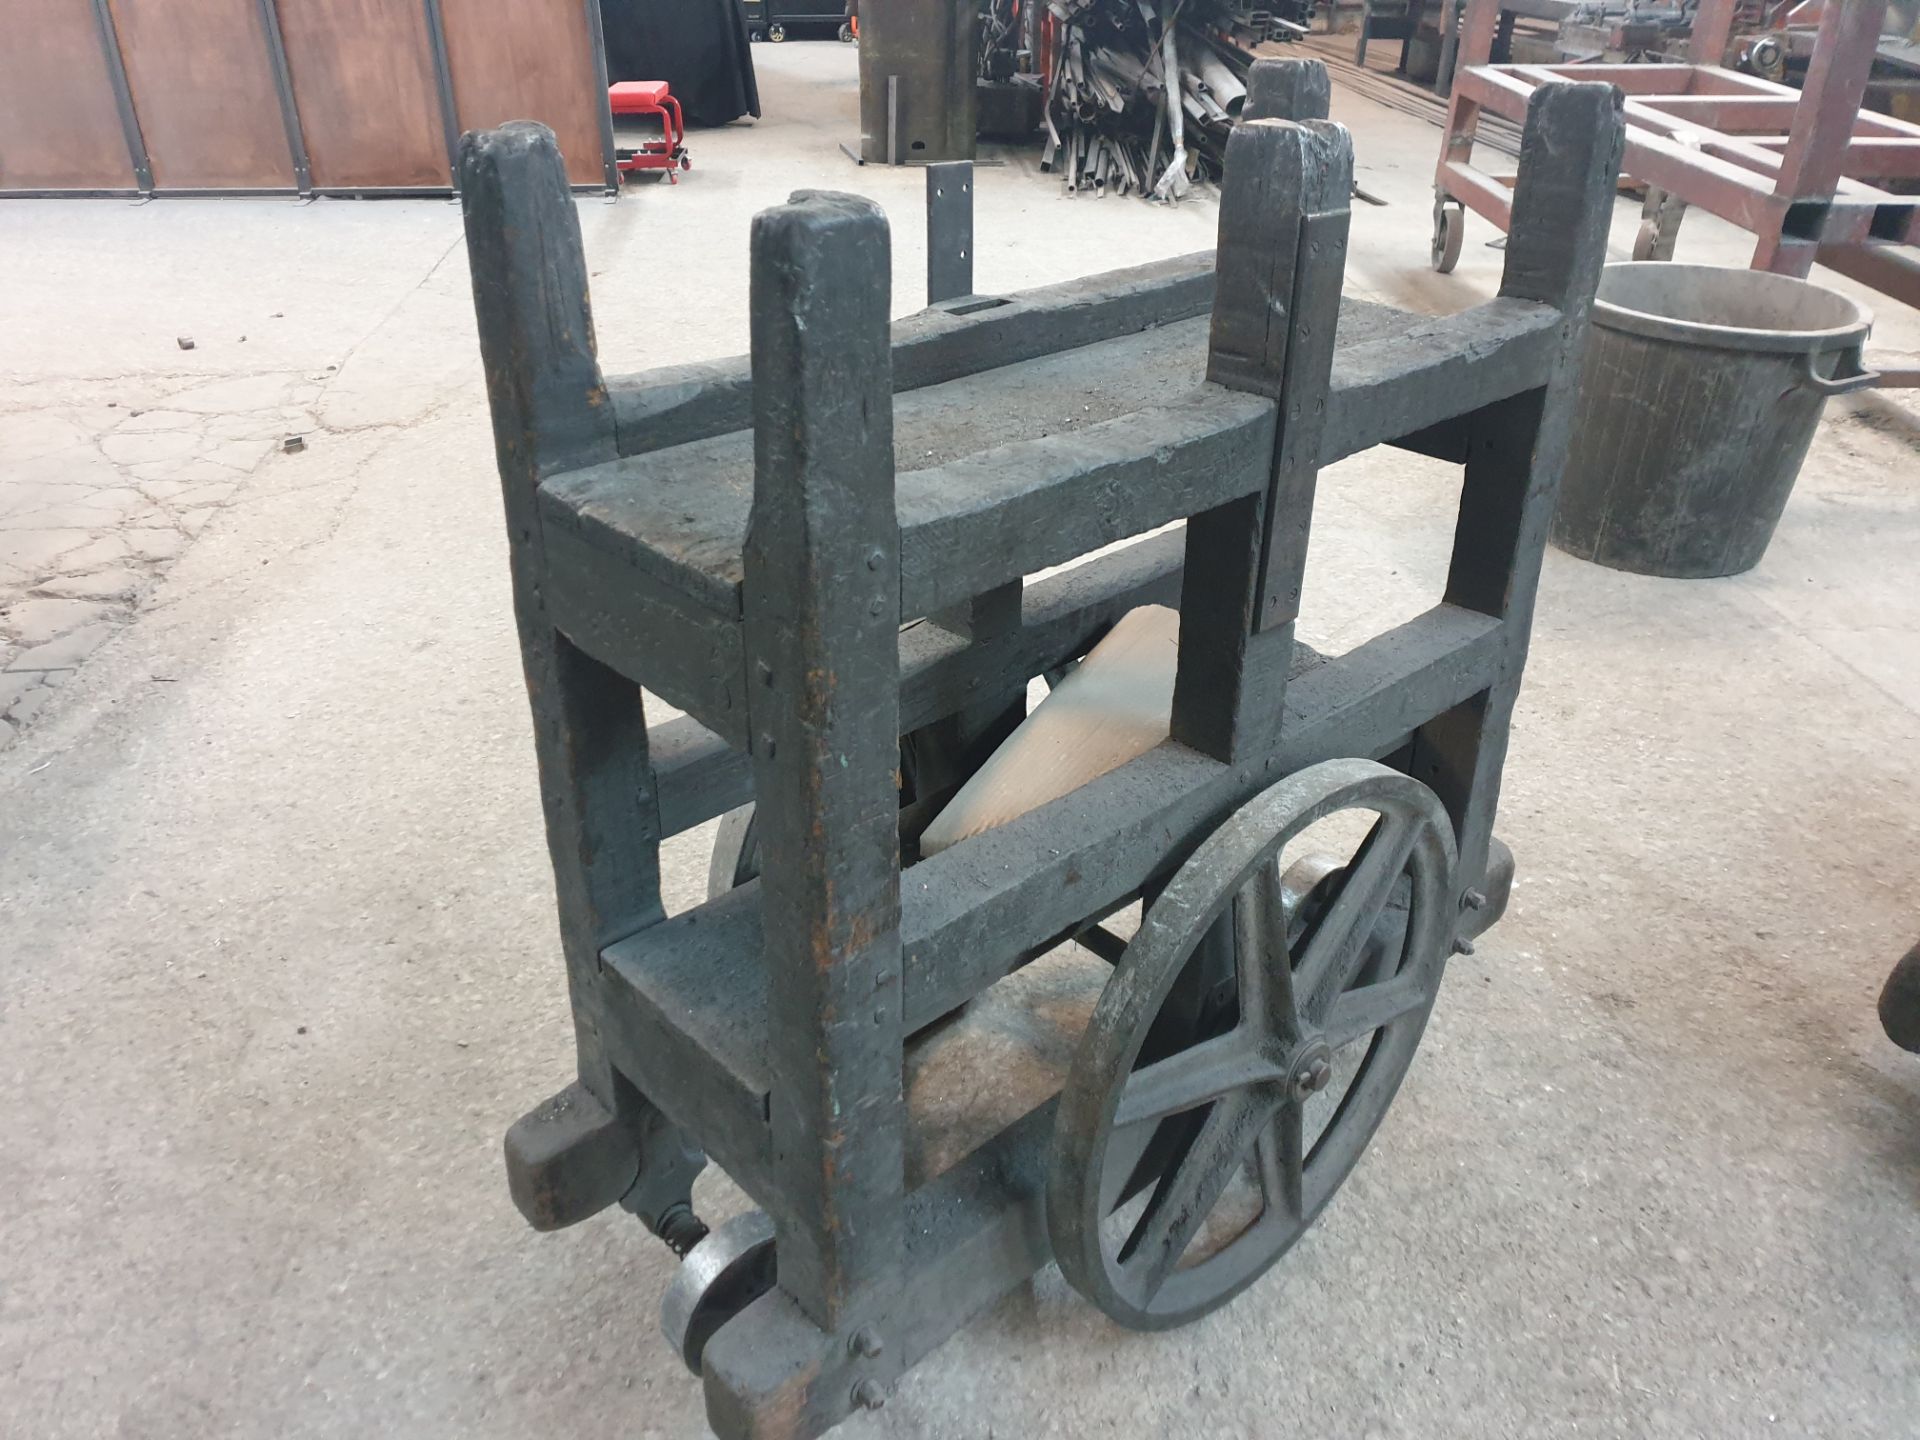 2 x Vintage trolleys - will hold a ton - Image 7 of 7